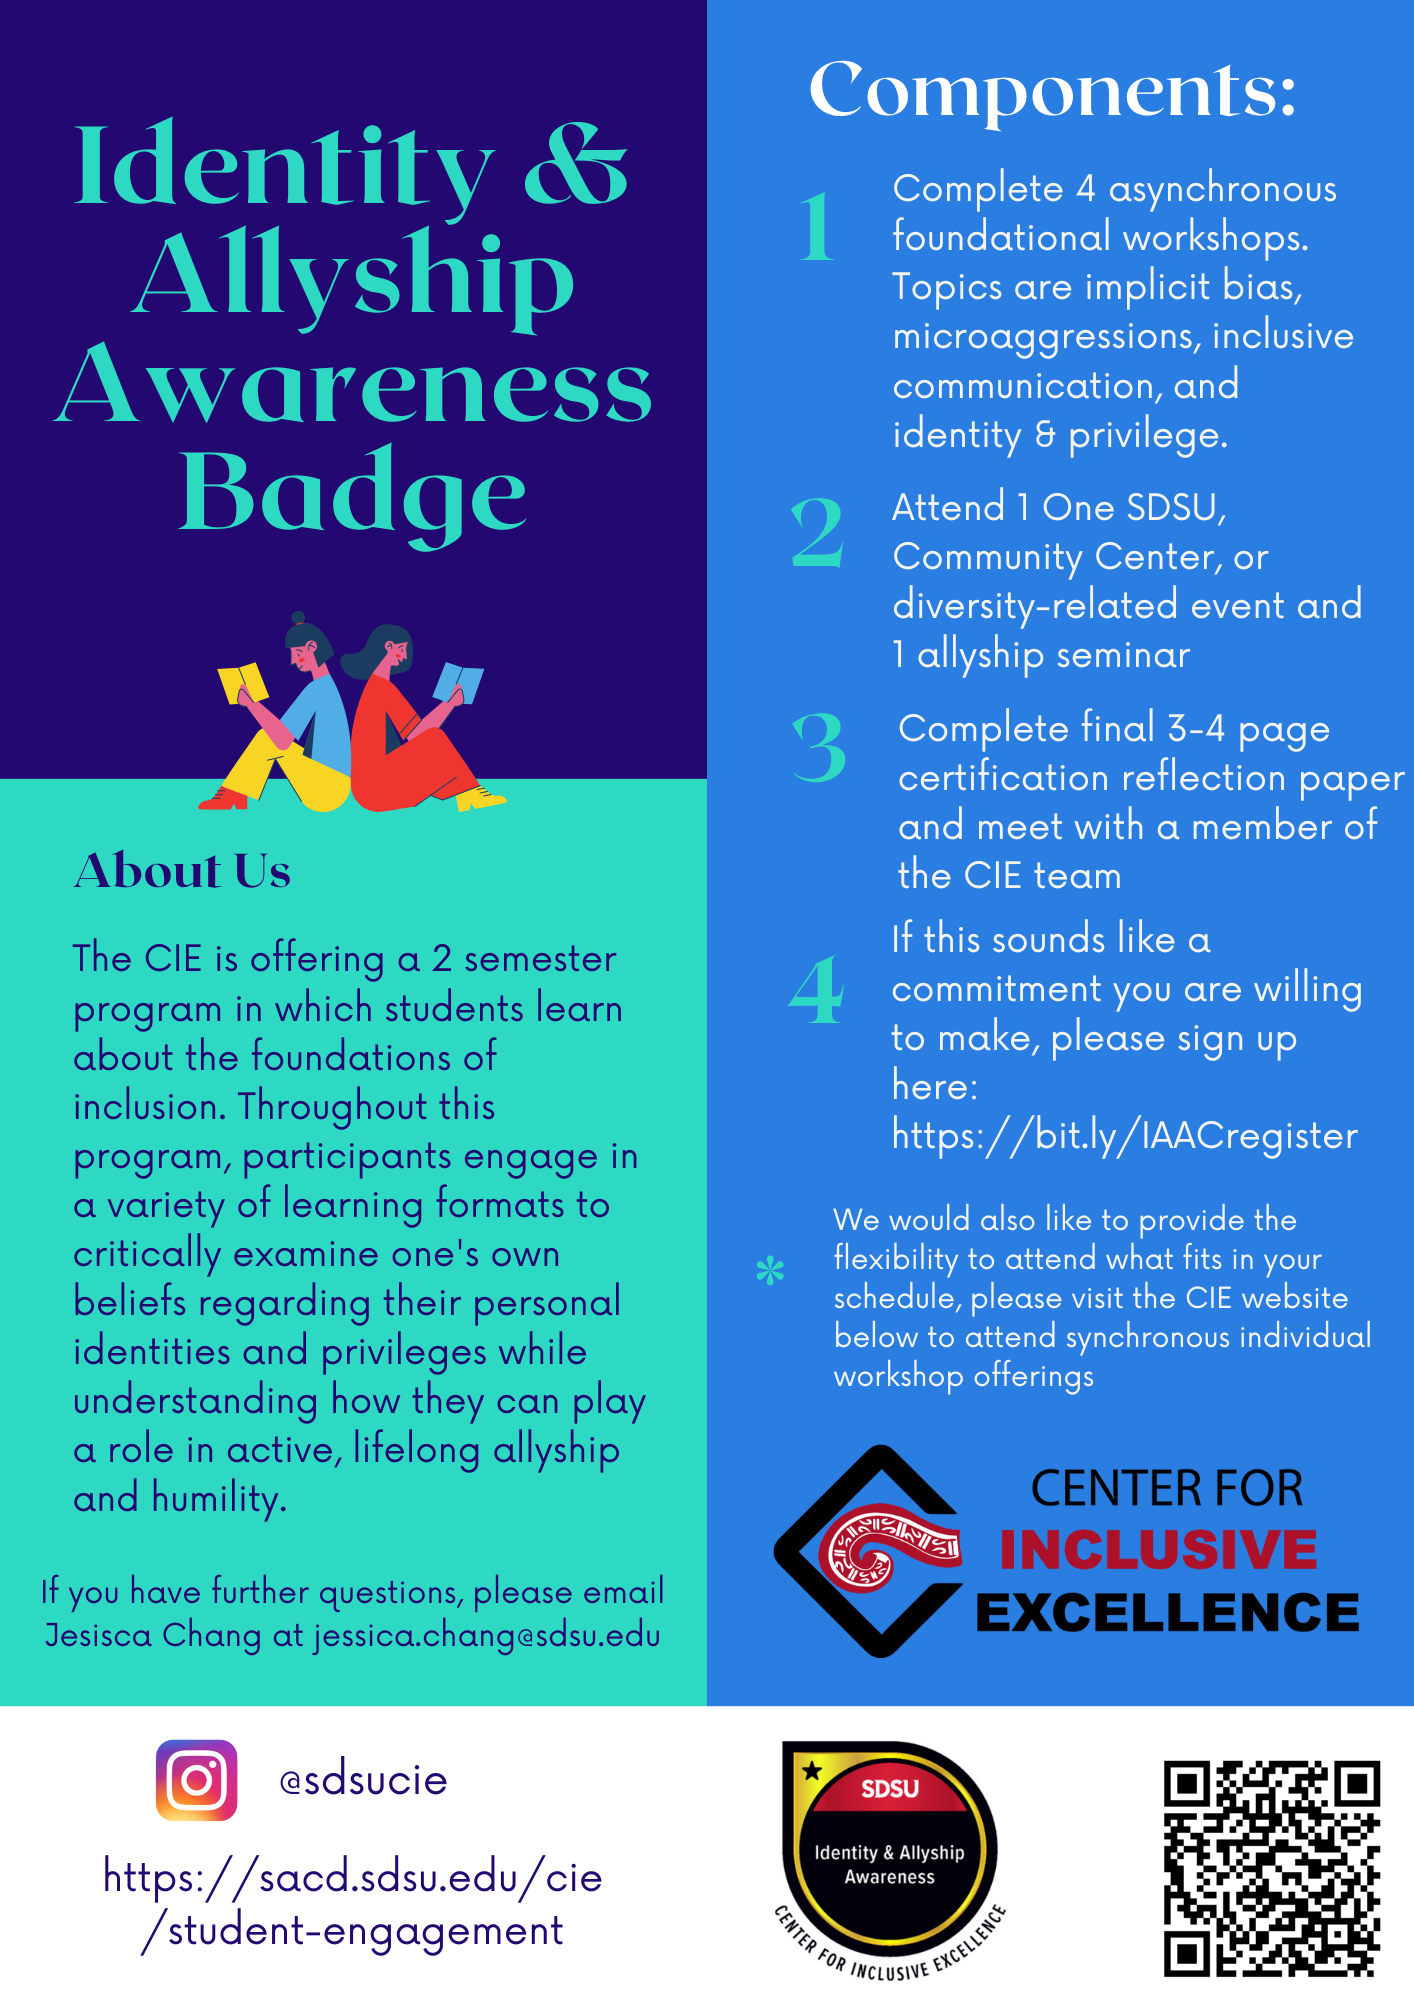 Flyer for Identity and Allyship Awarenessc Badge offered in 2 semesters to SDSU students to learn about the foundations of inclusion